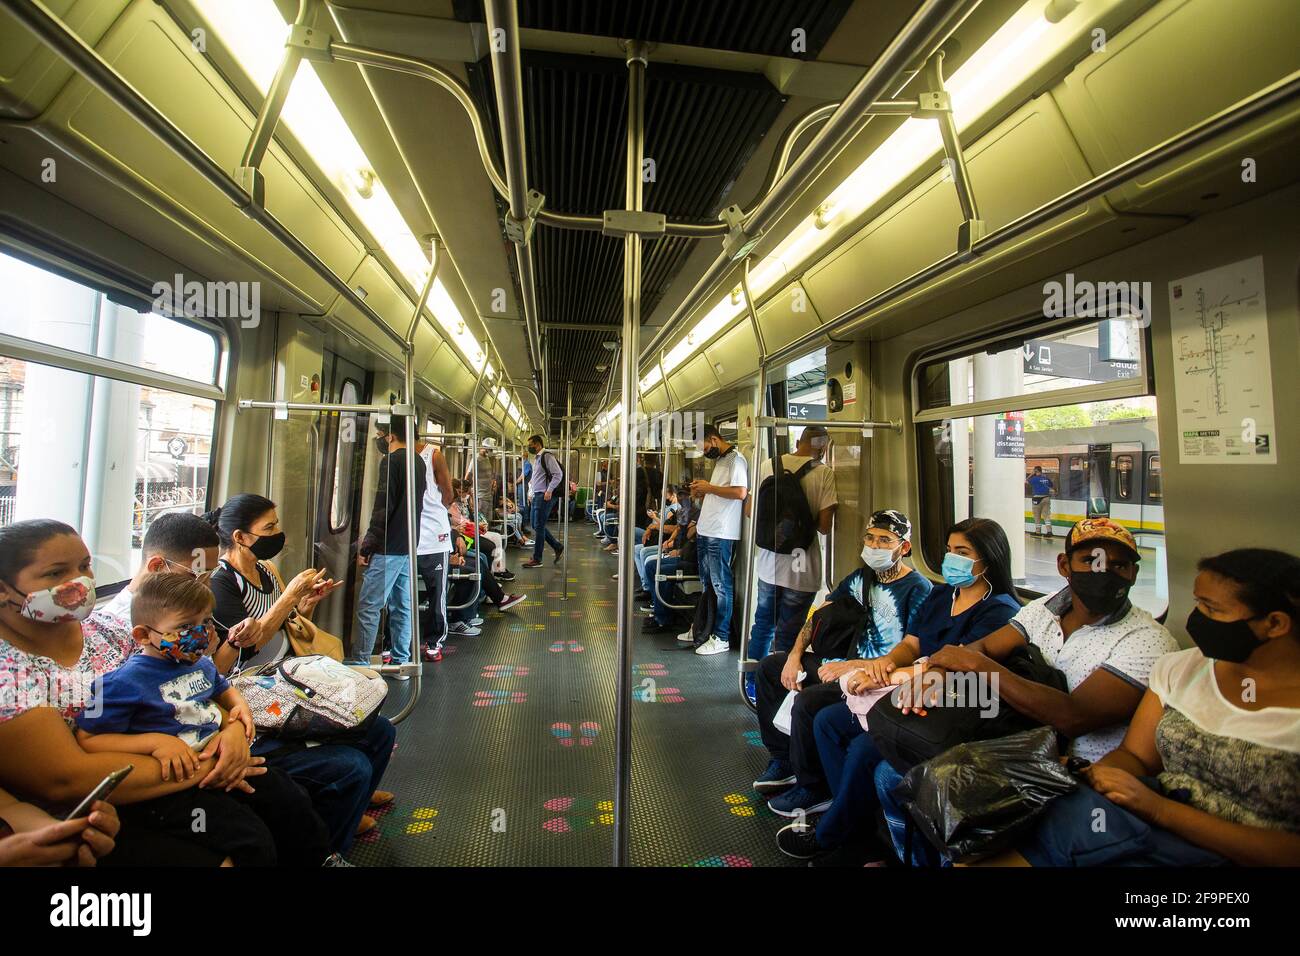 Medellin, Antioquia. Colombia - February 25, 2017. The Metro was the first modern mass transportation system in Colombia. Its construction began on Ap Stock Photo